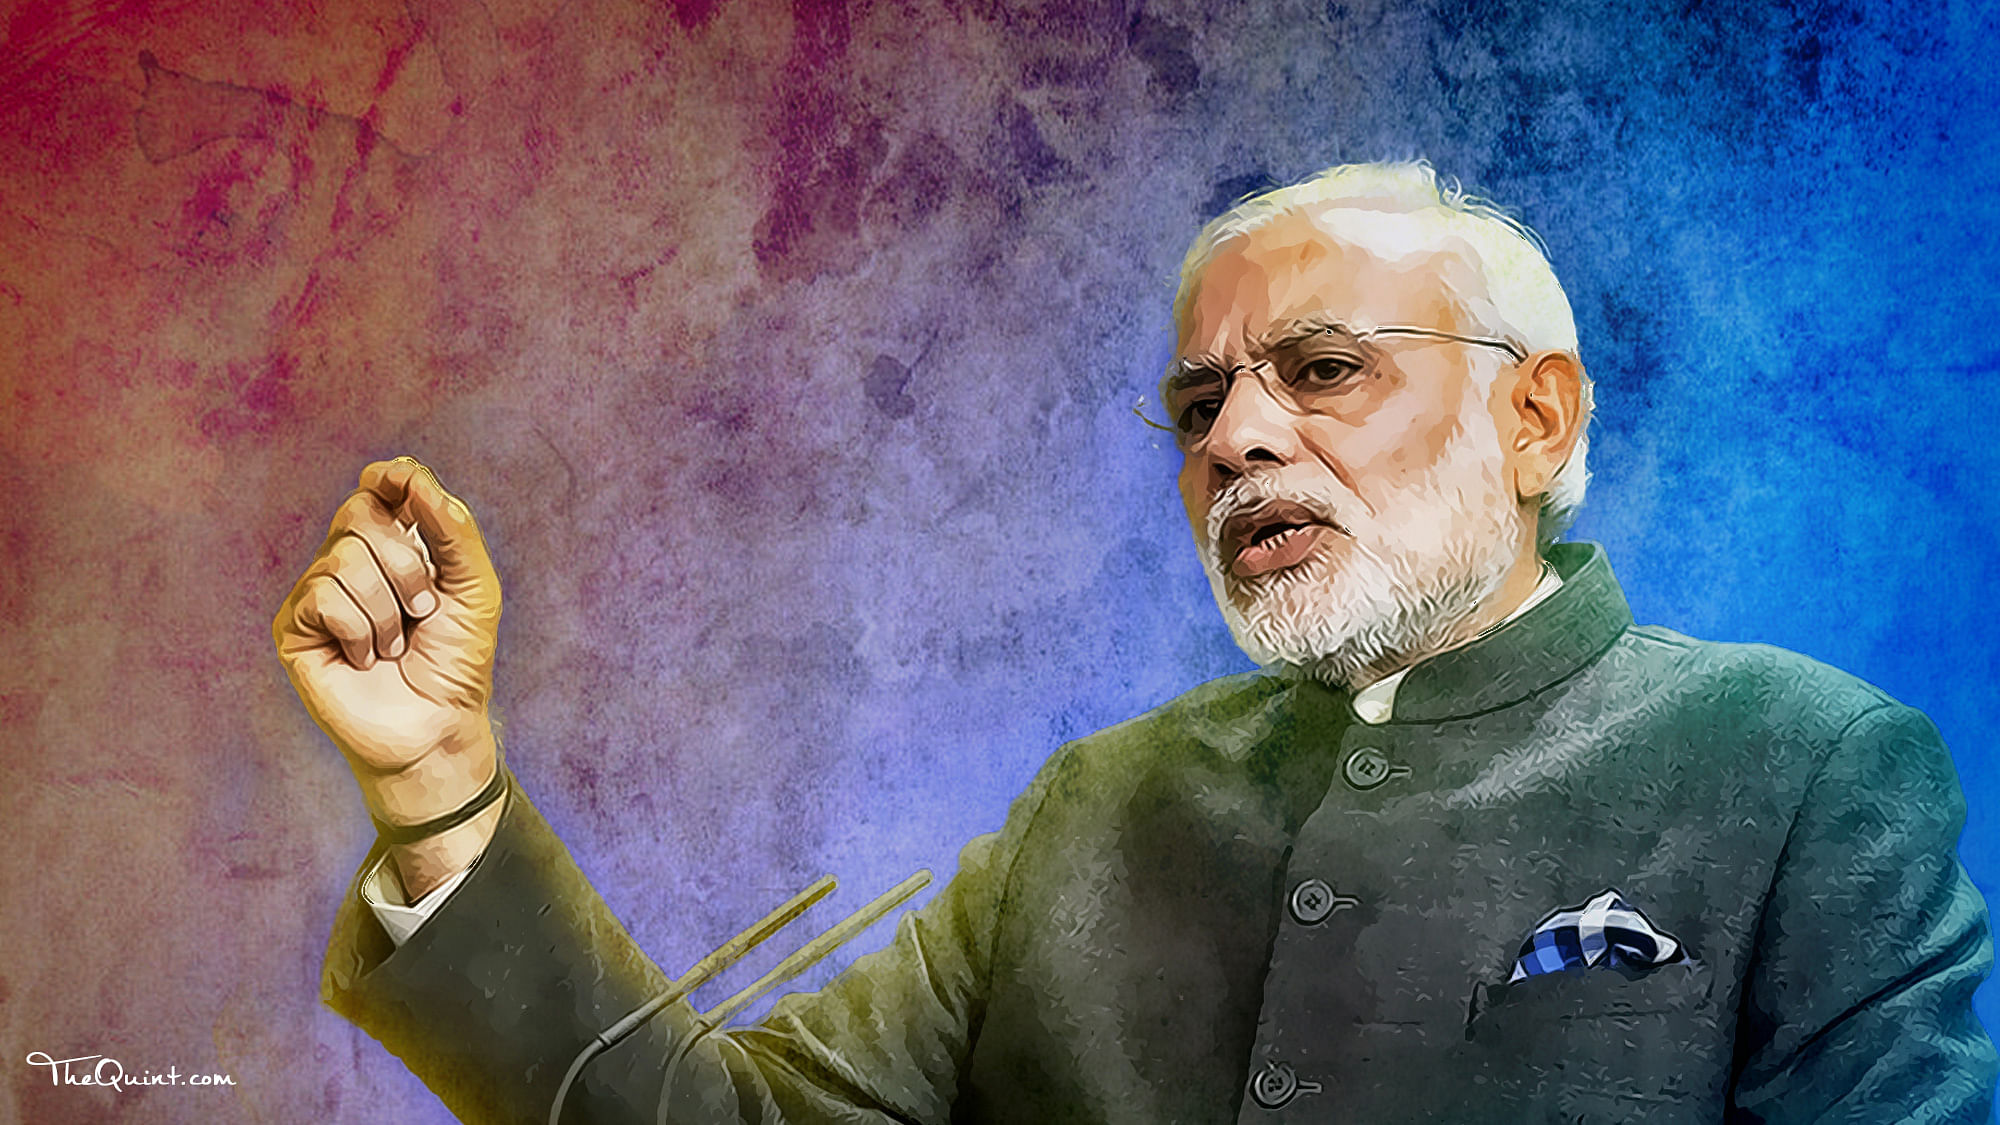 PM Modi is now more presidential than before, can solely deliver on the development promises. (Photo: Lijumol Joseph/<b>The Quint</b>)